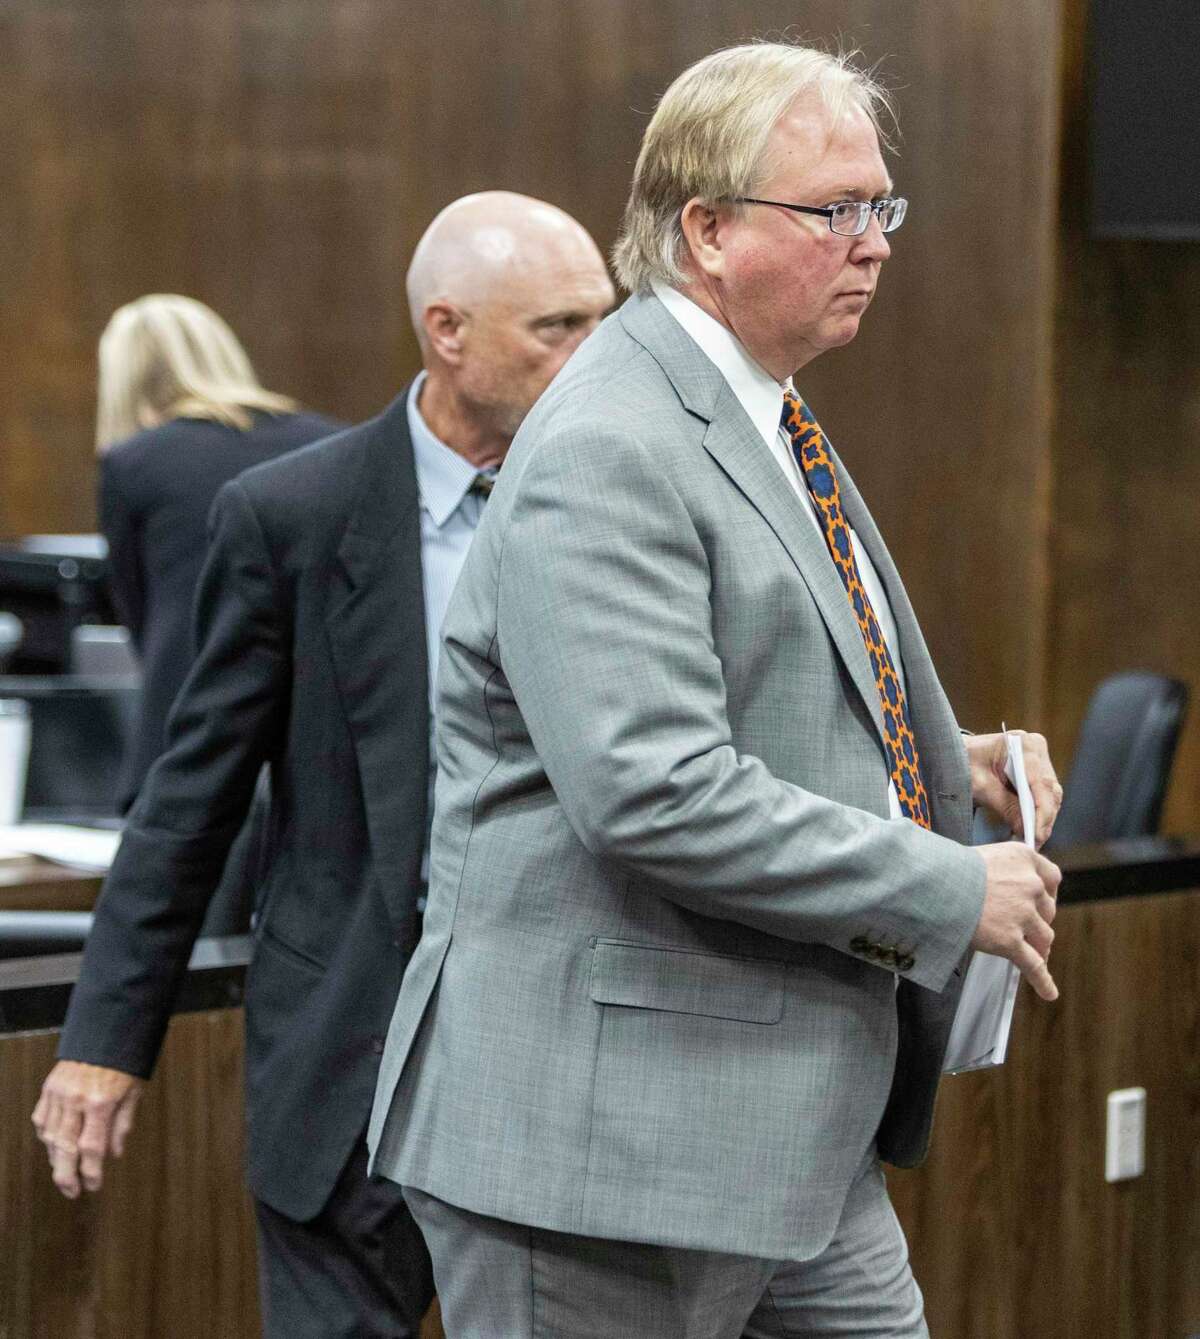 Rackspace co-founder Graham Weston leaves the courtroom Wednesday during a break in his divorce case in New Braunfels. A judge granted a divorce, ending Weston’s more than 27-year marriage to Elizabeth Weston.